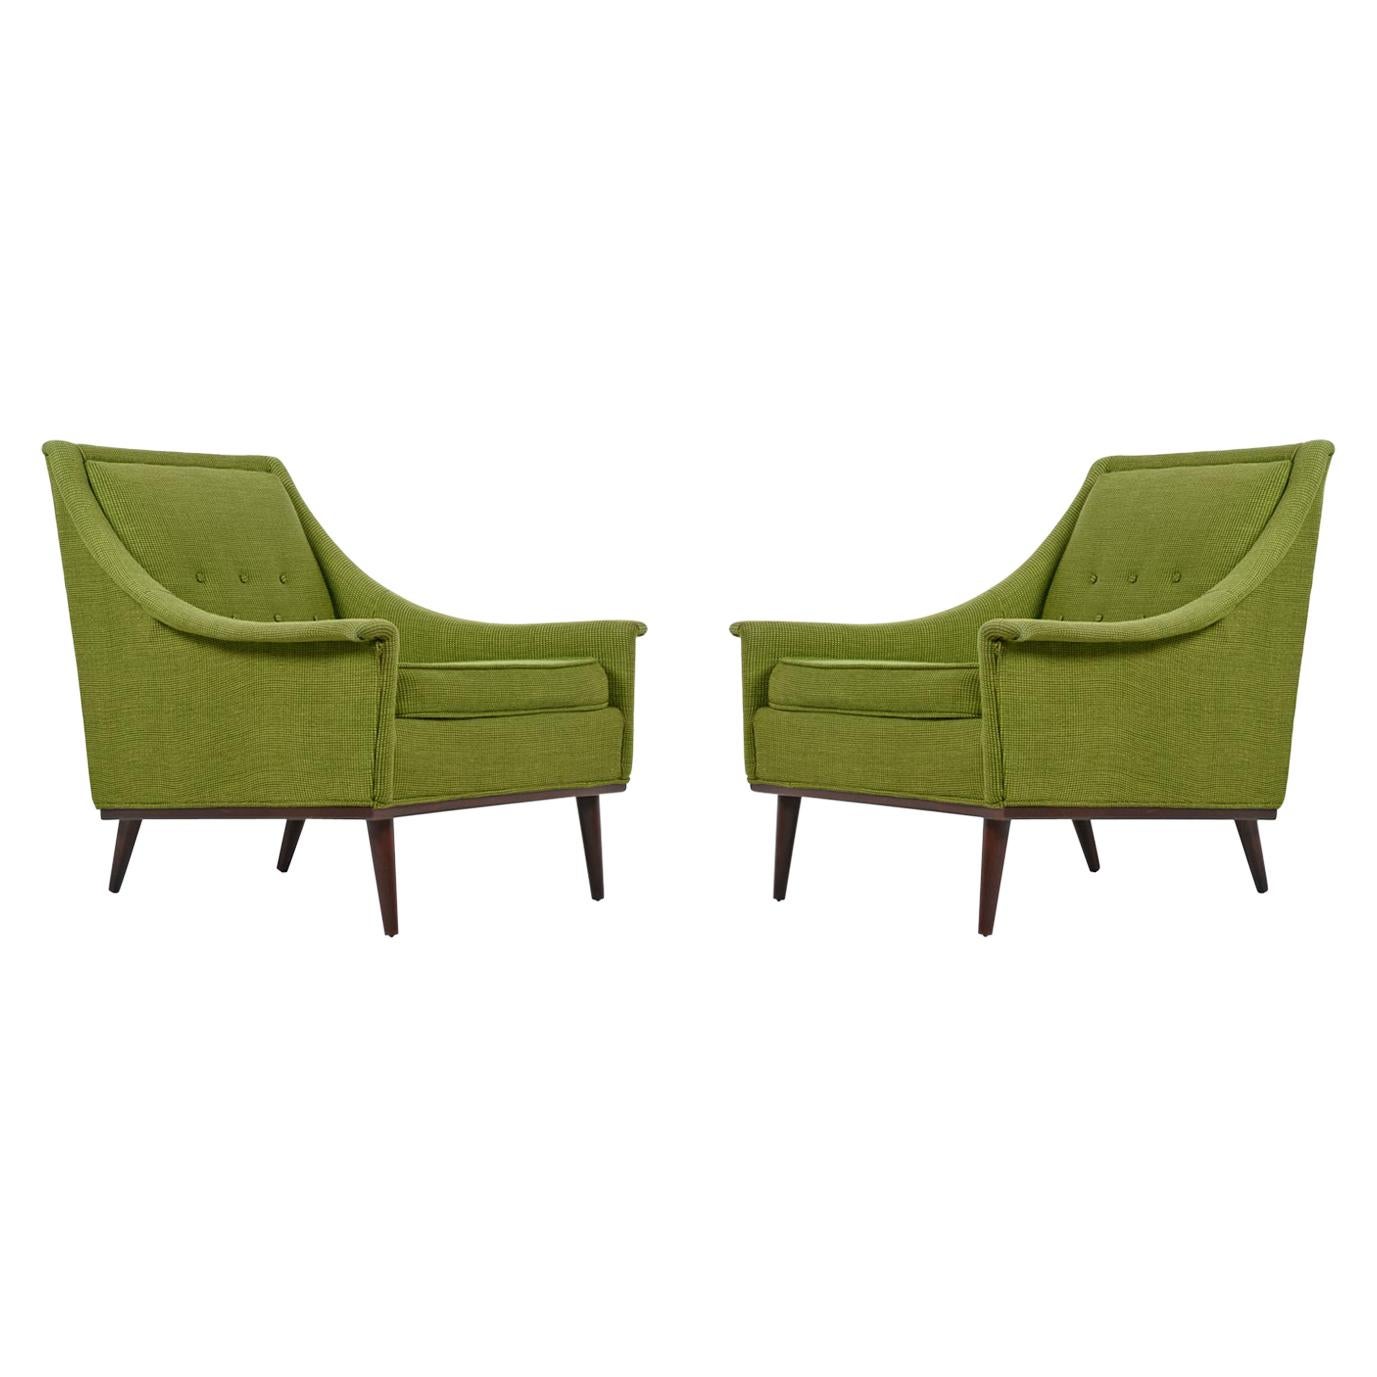 Vintage Original Two-Tone Green Tweed Tufted Lounge Chairs by Selig, circa 1960s